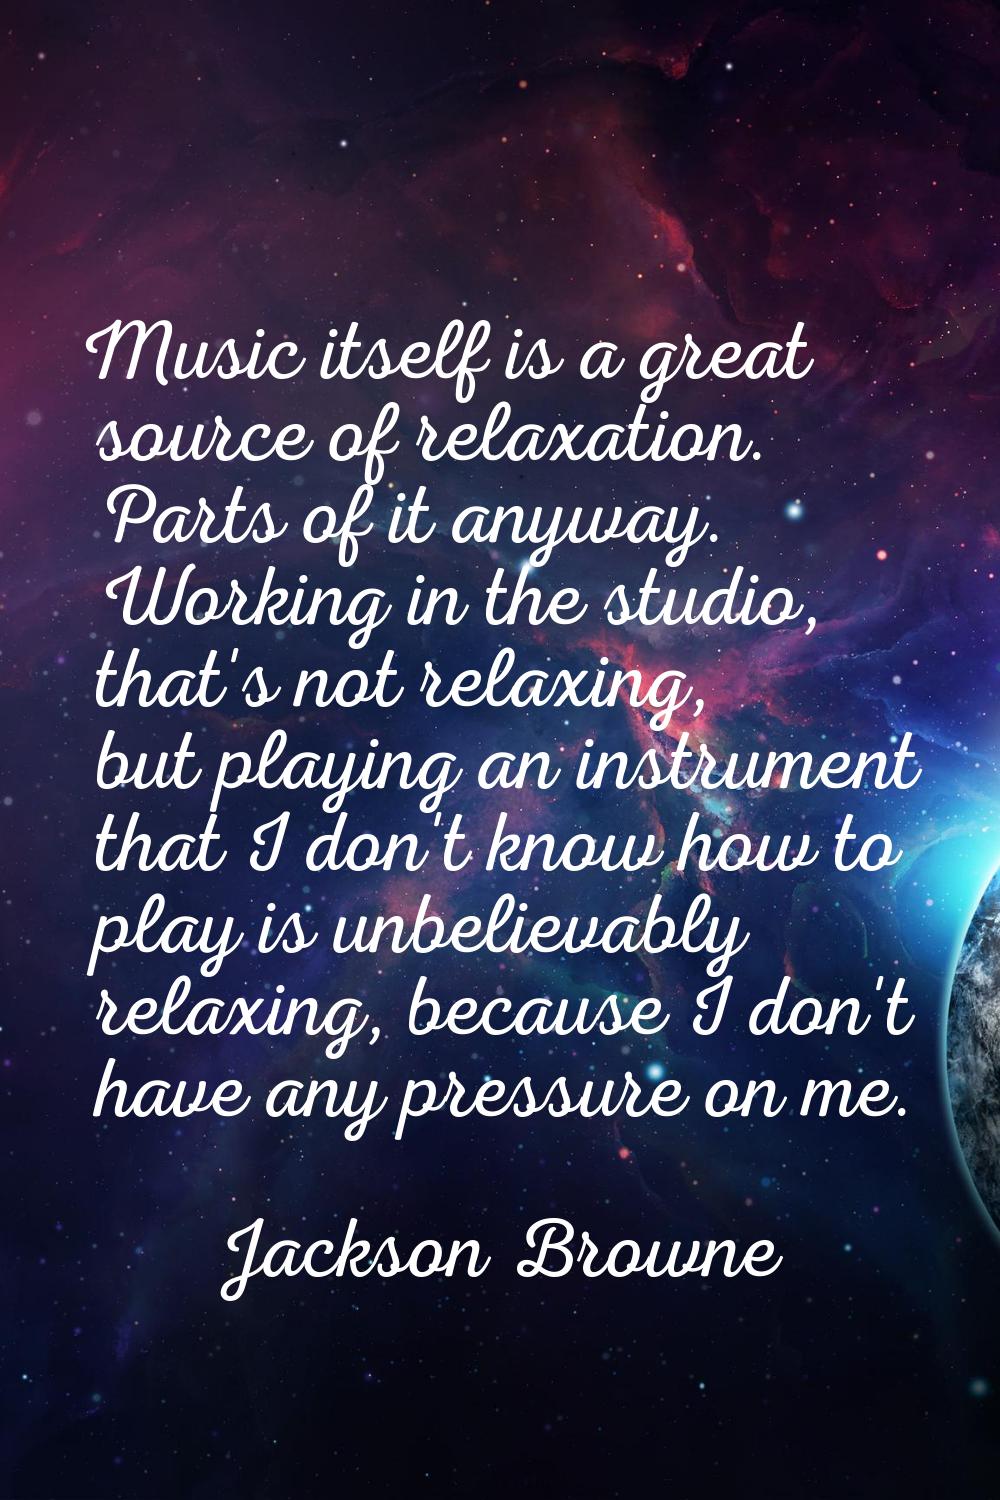 Music itself is a great source of relaxation. Parts of it anyway. Working in the studio, that's not